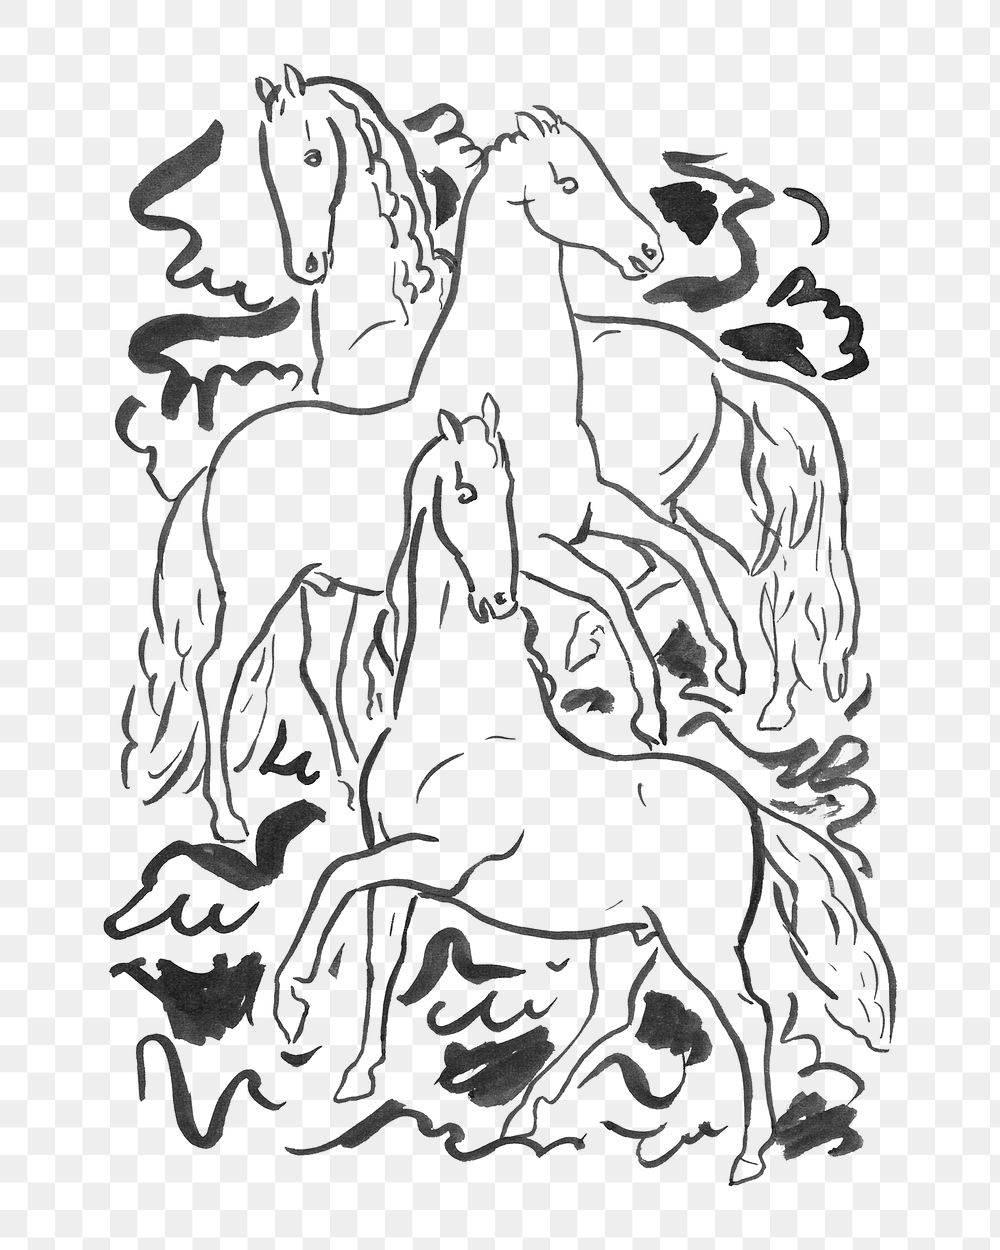 Vintage horses png design element, remixed from artworks from Leo Gestel